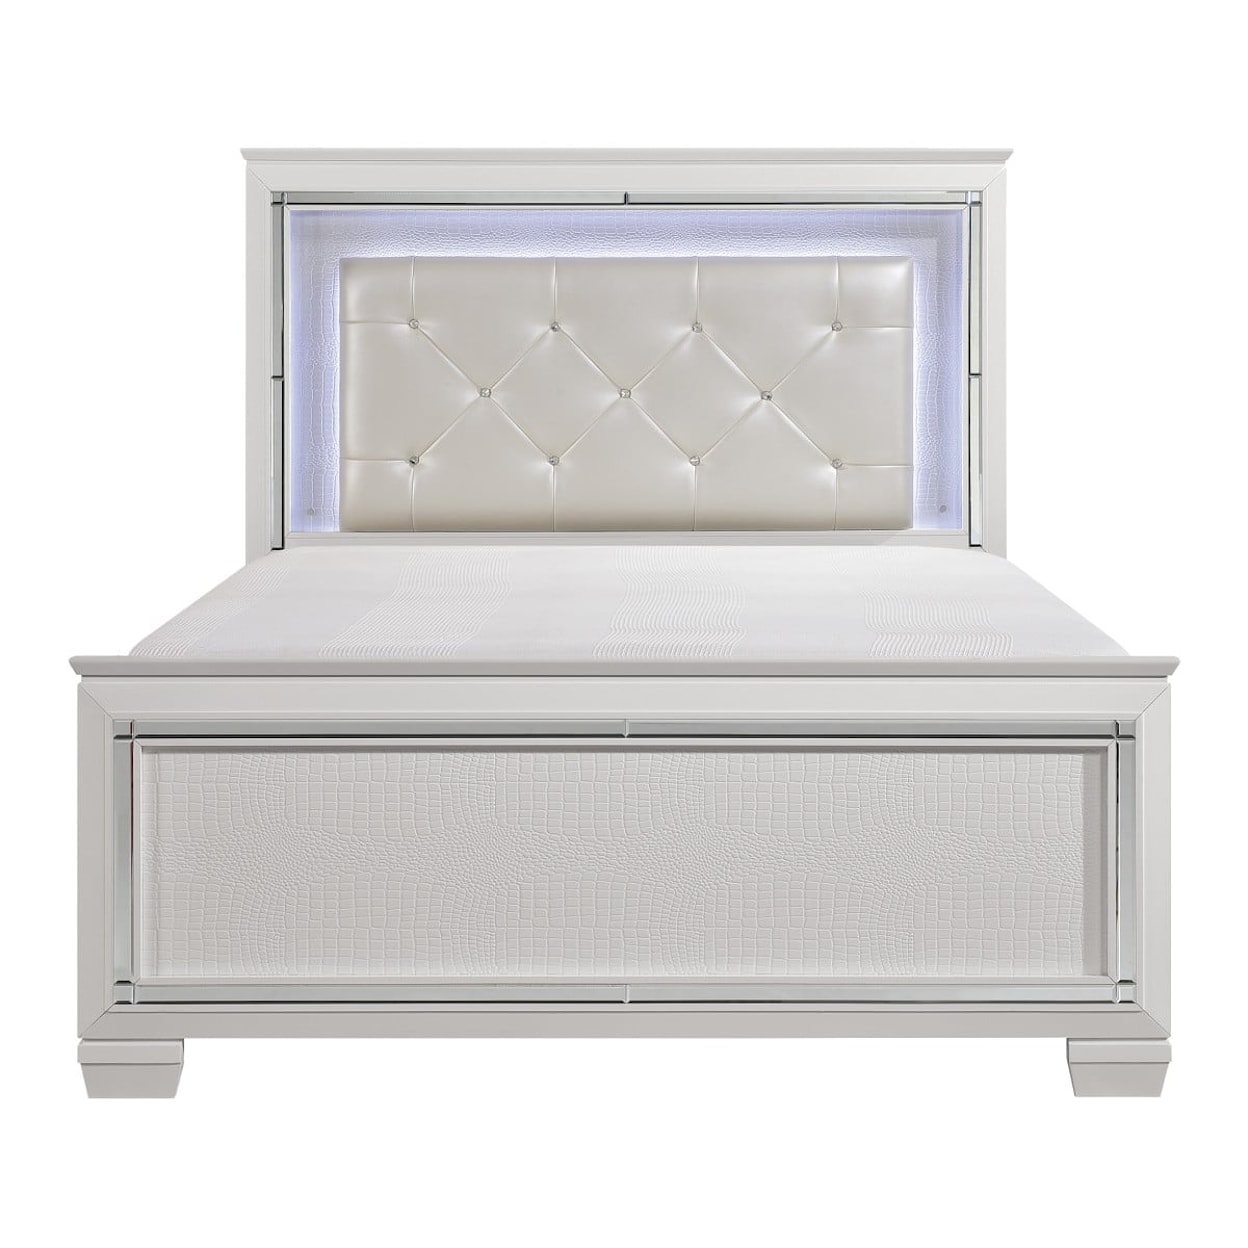 Homelegance Furniture Allura Queen Bed with Led Lighting